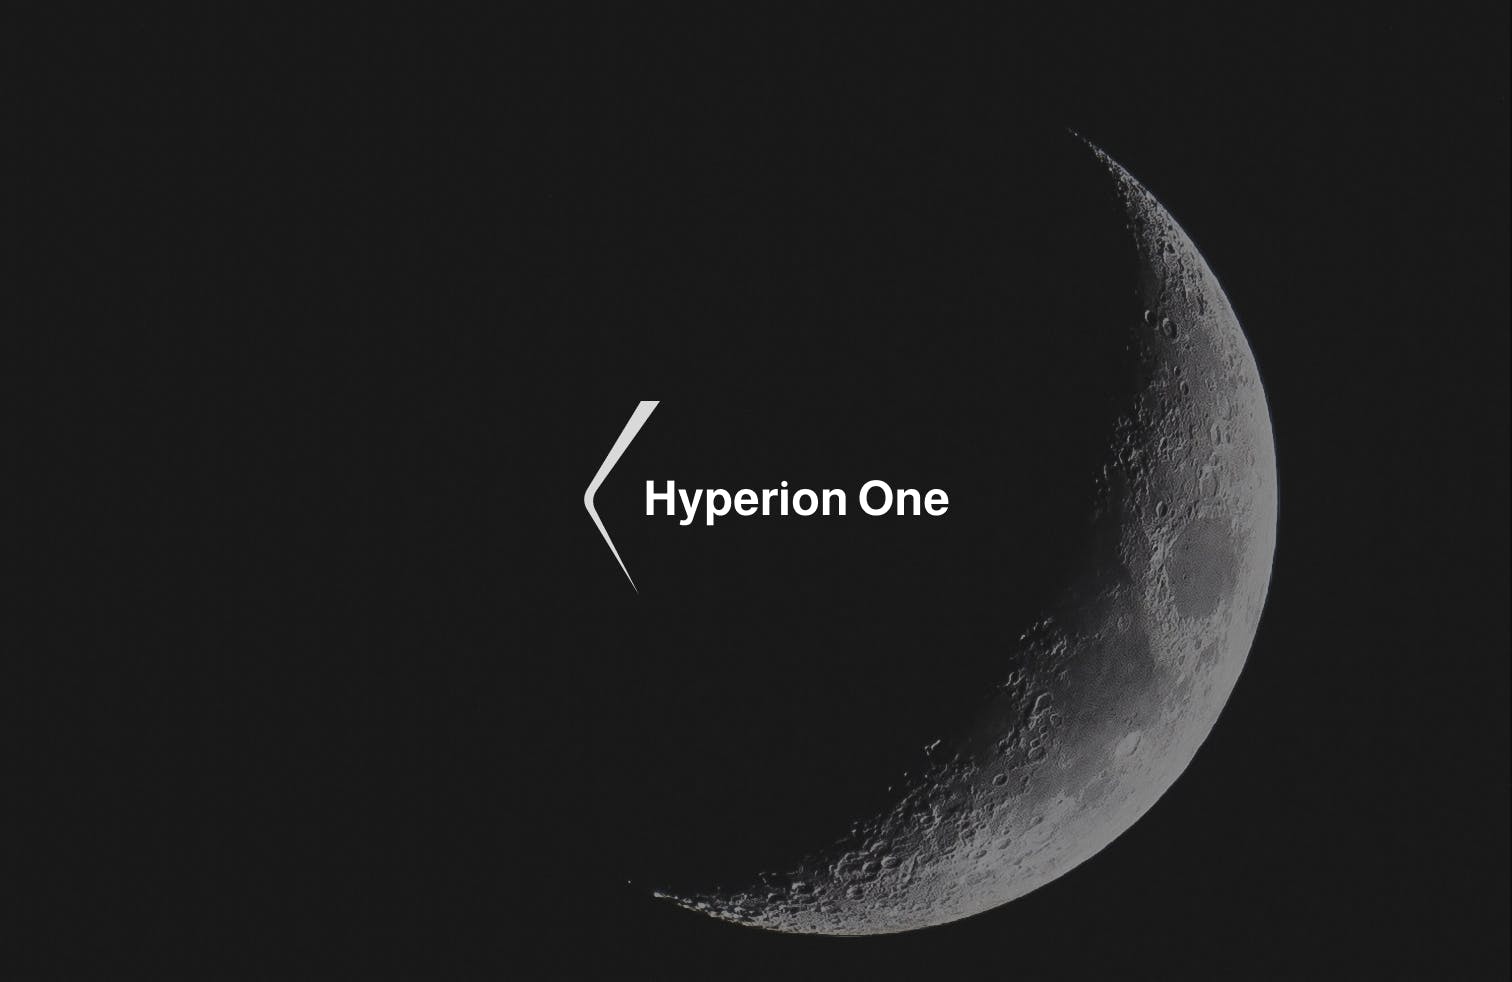 Hyperion One